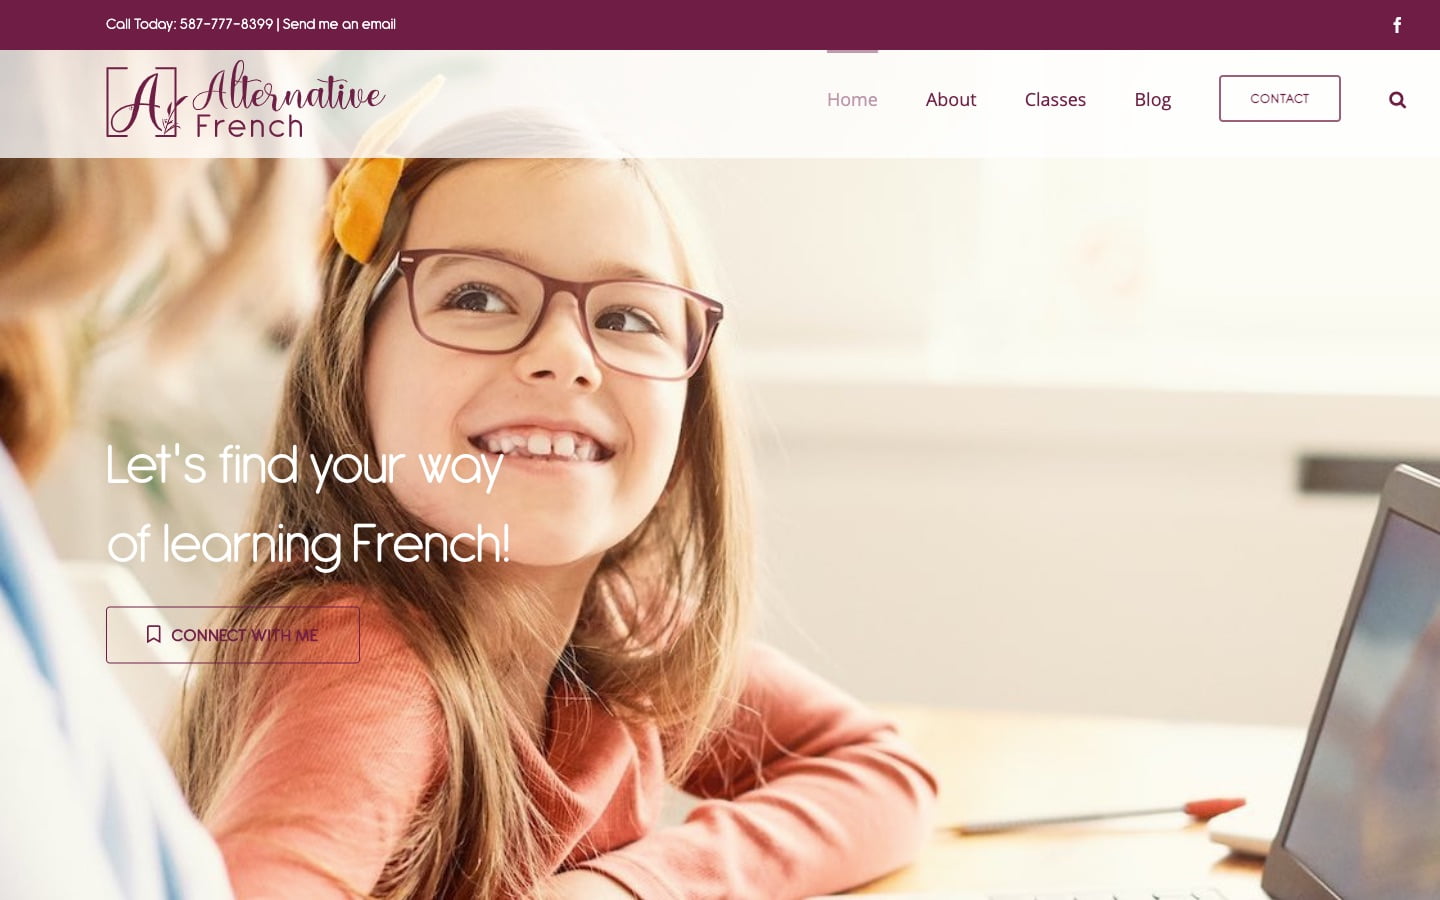 Alternative French Website Screenshot | Creative Elements Consulting